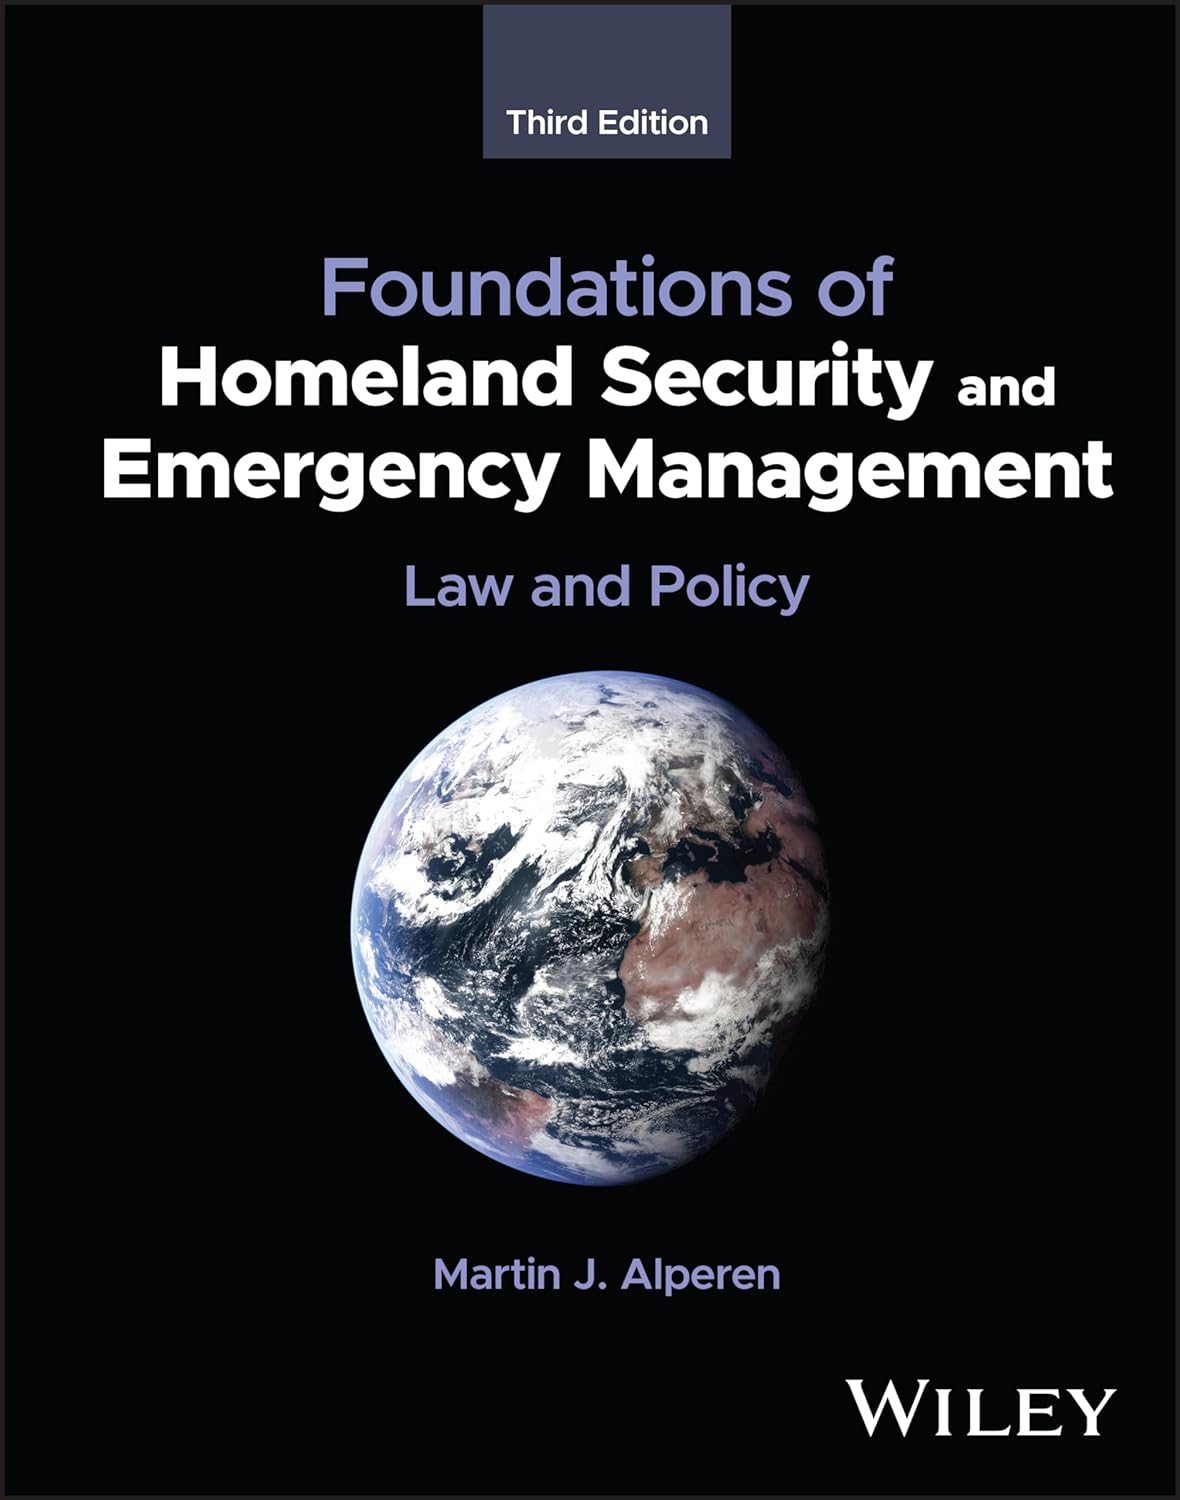 (EBook PDF)Foundations of Homeland Security and Emergency Management: Law and Policy, 3rd Edition by Martin J. Alperen